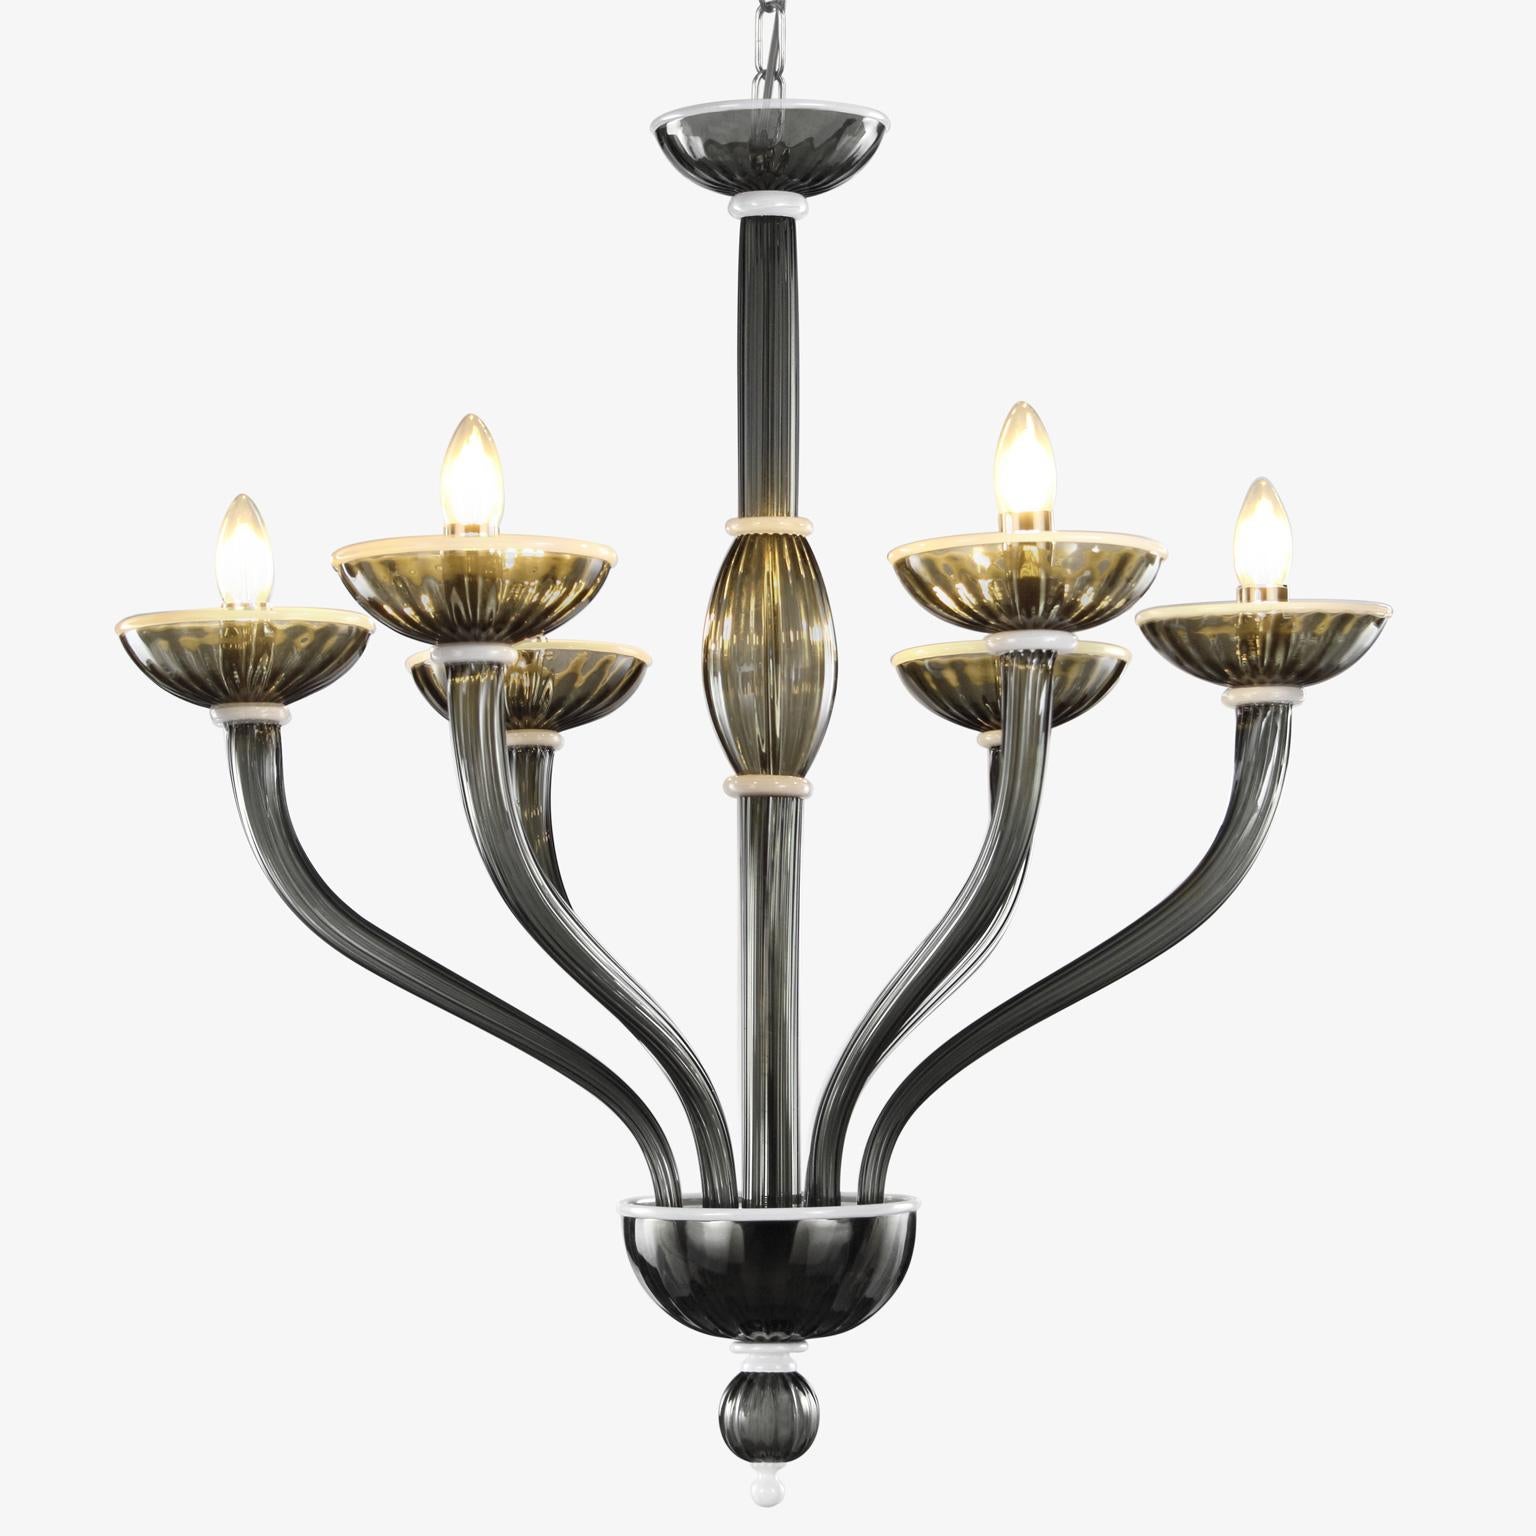 Velvet chandelier 6 lights. Dark grey Murano glass with white details. Climbing arms by Multiforme.

The blown glass velvet Venetian chandelier is inspired from the Art Deco style. It is characterized by long arms which are bended upwards and by